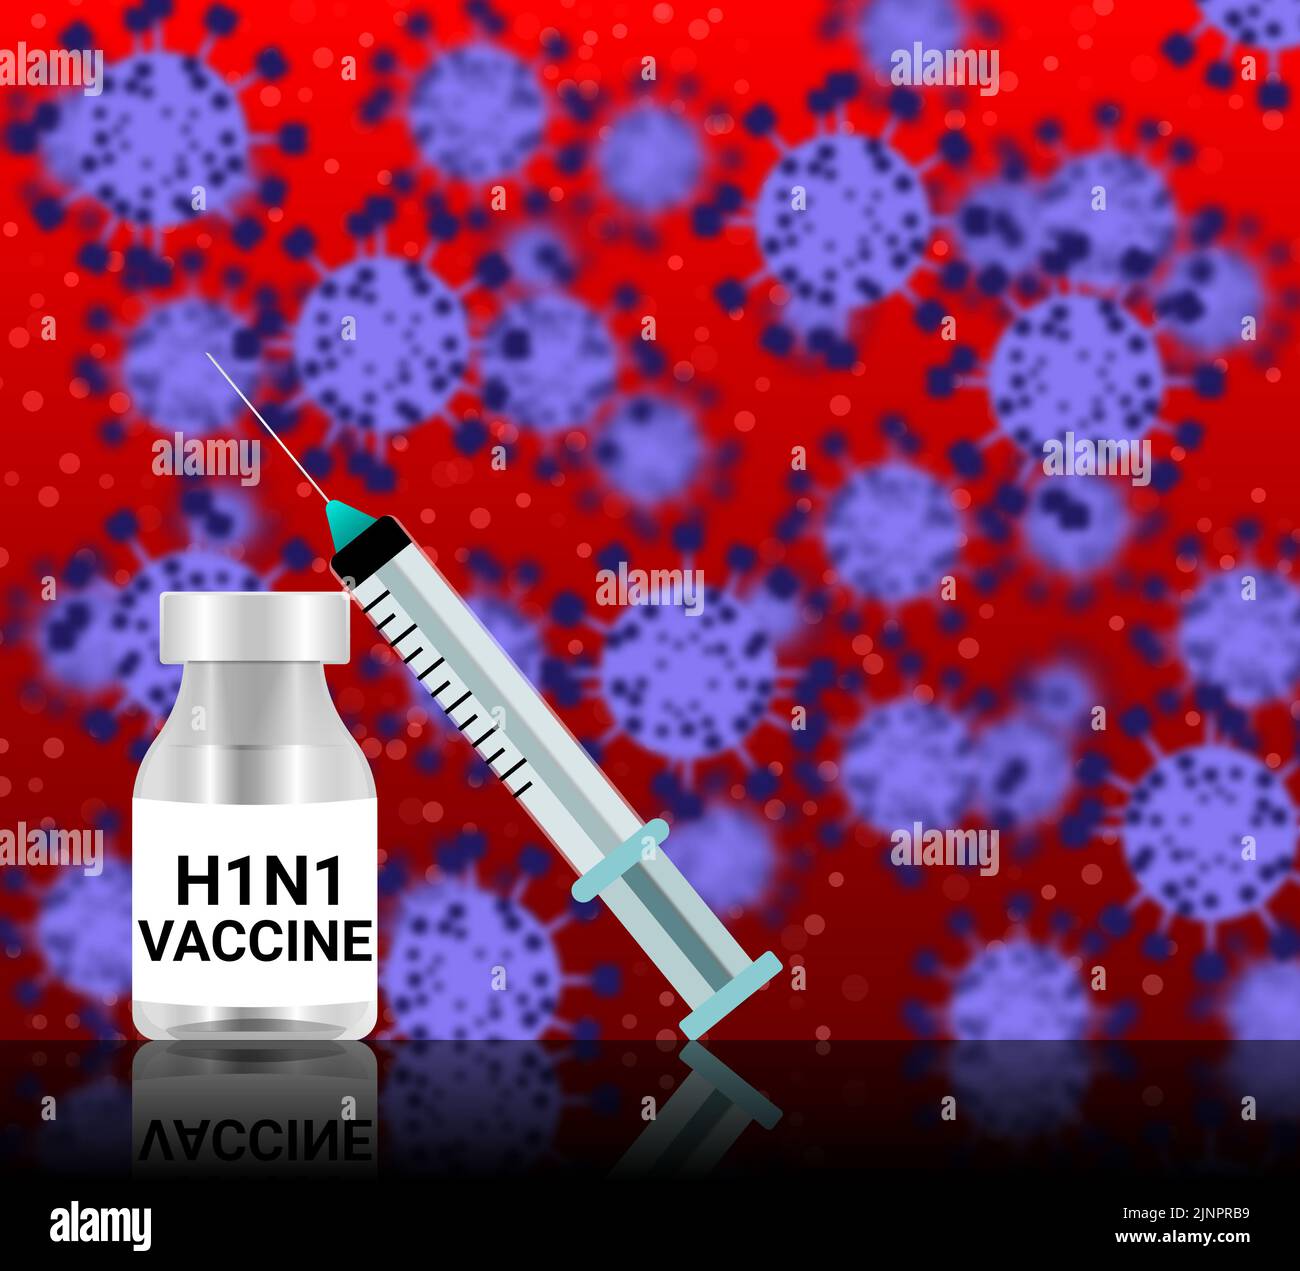 H1N1 virus vaccine on blur background and surface reflection. medical reasearch and health care awareness illustration and background. Stock Photo